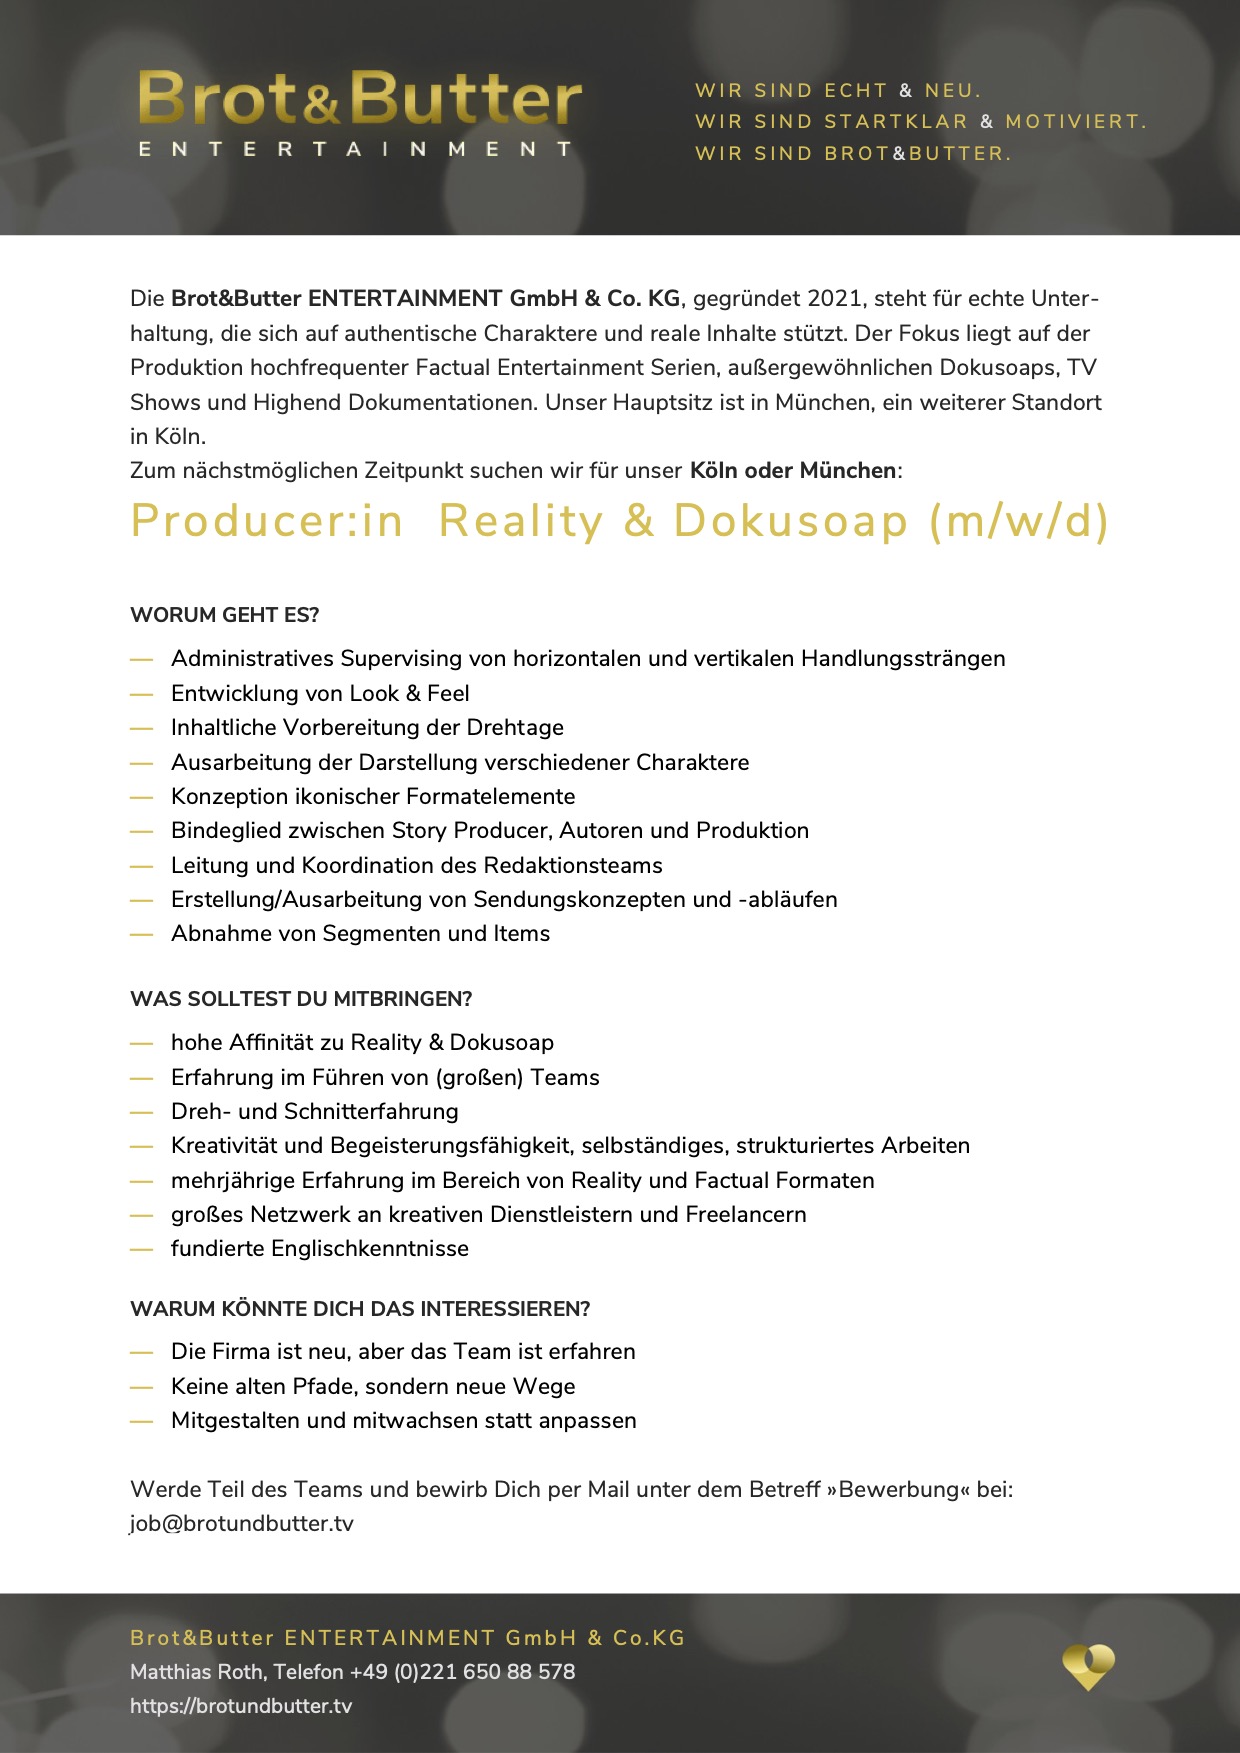 Producer:in Reality & Dokusoap (m/w/d)